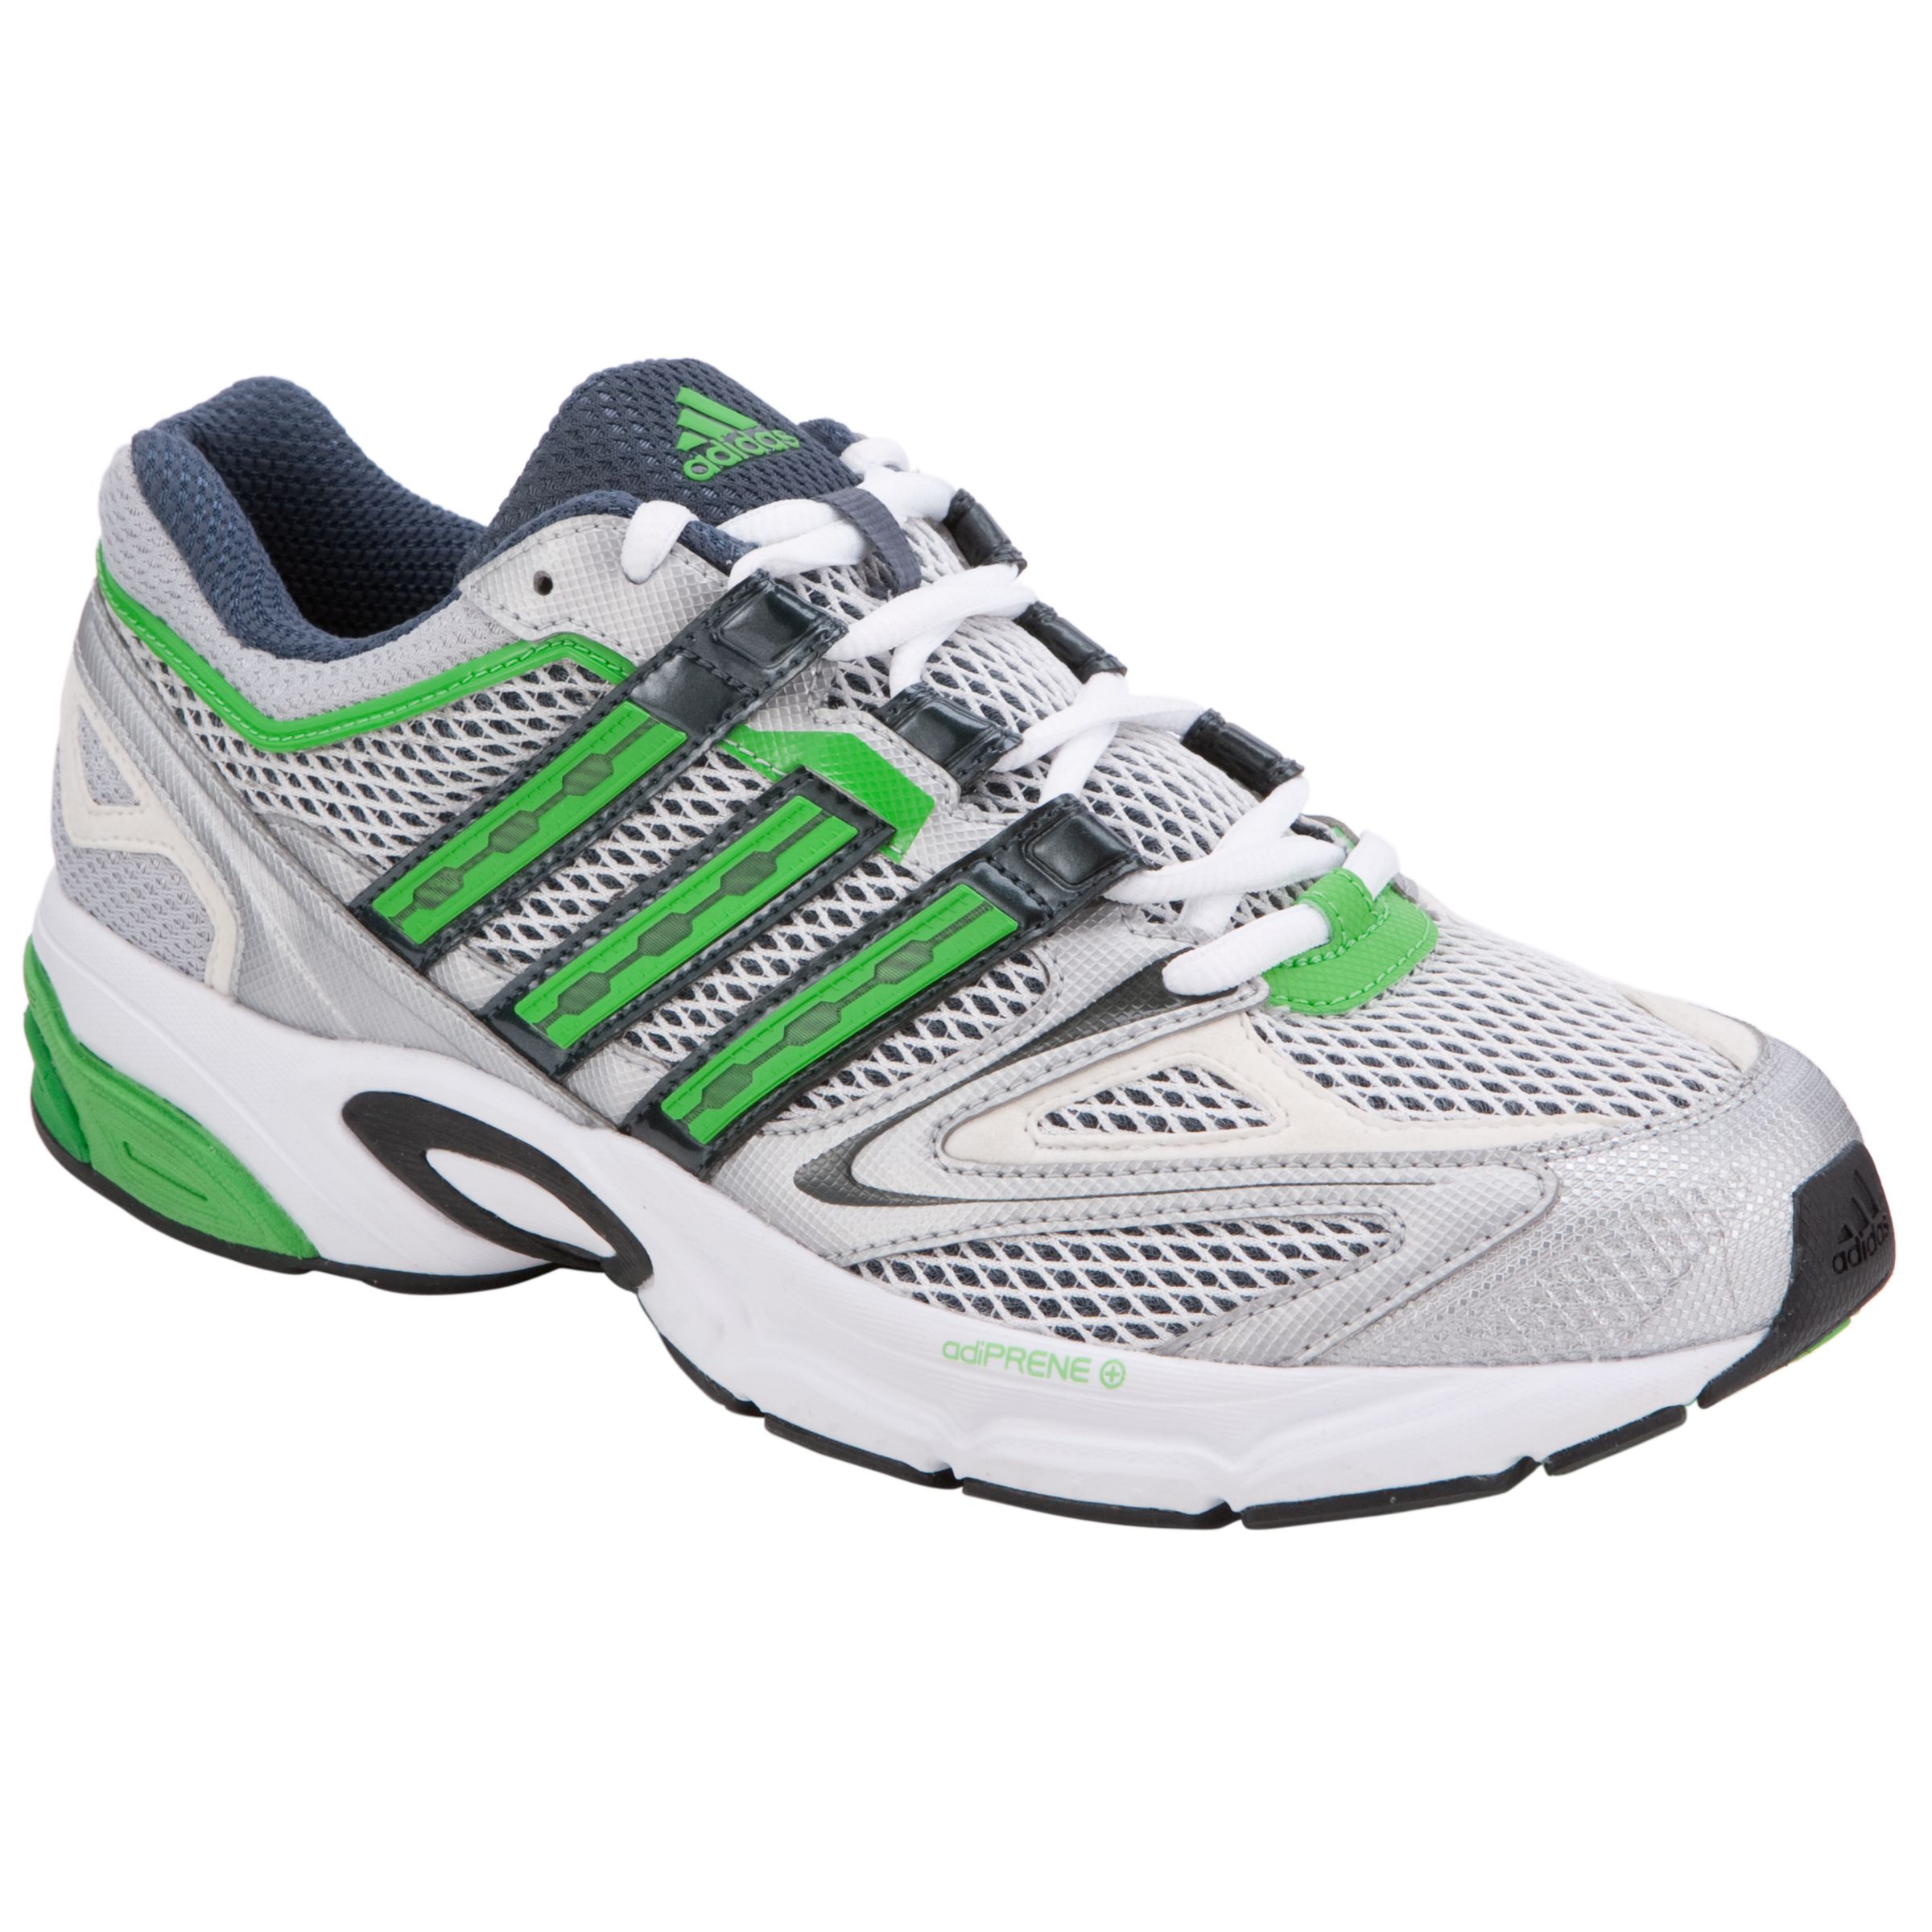 Adidas Exerta Stability Mens Running Shoes,